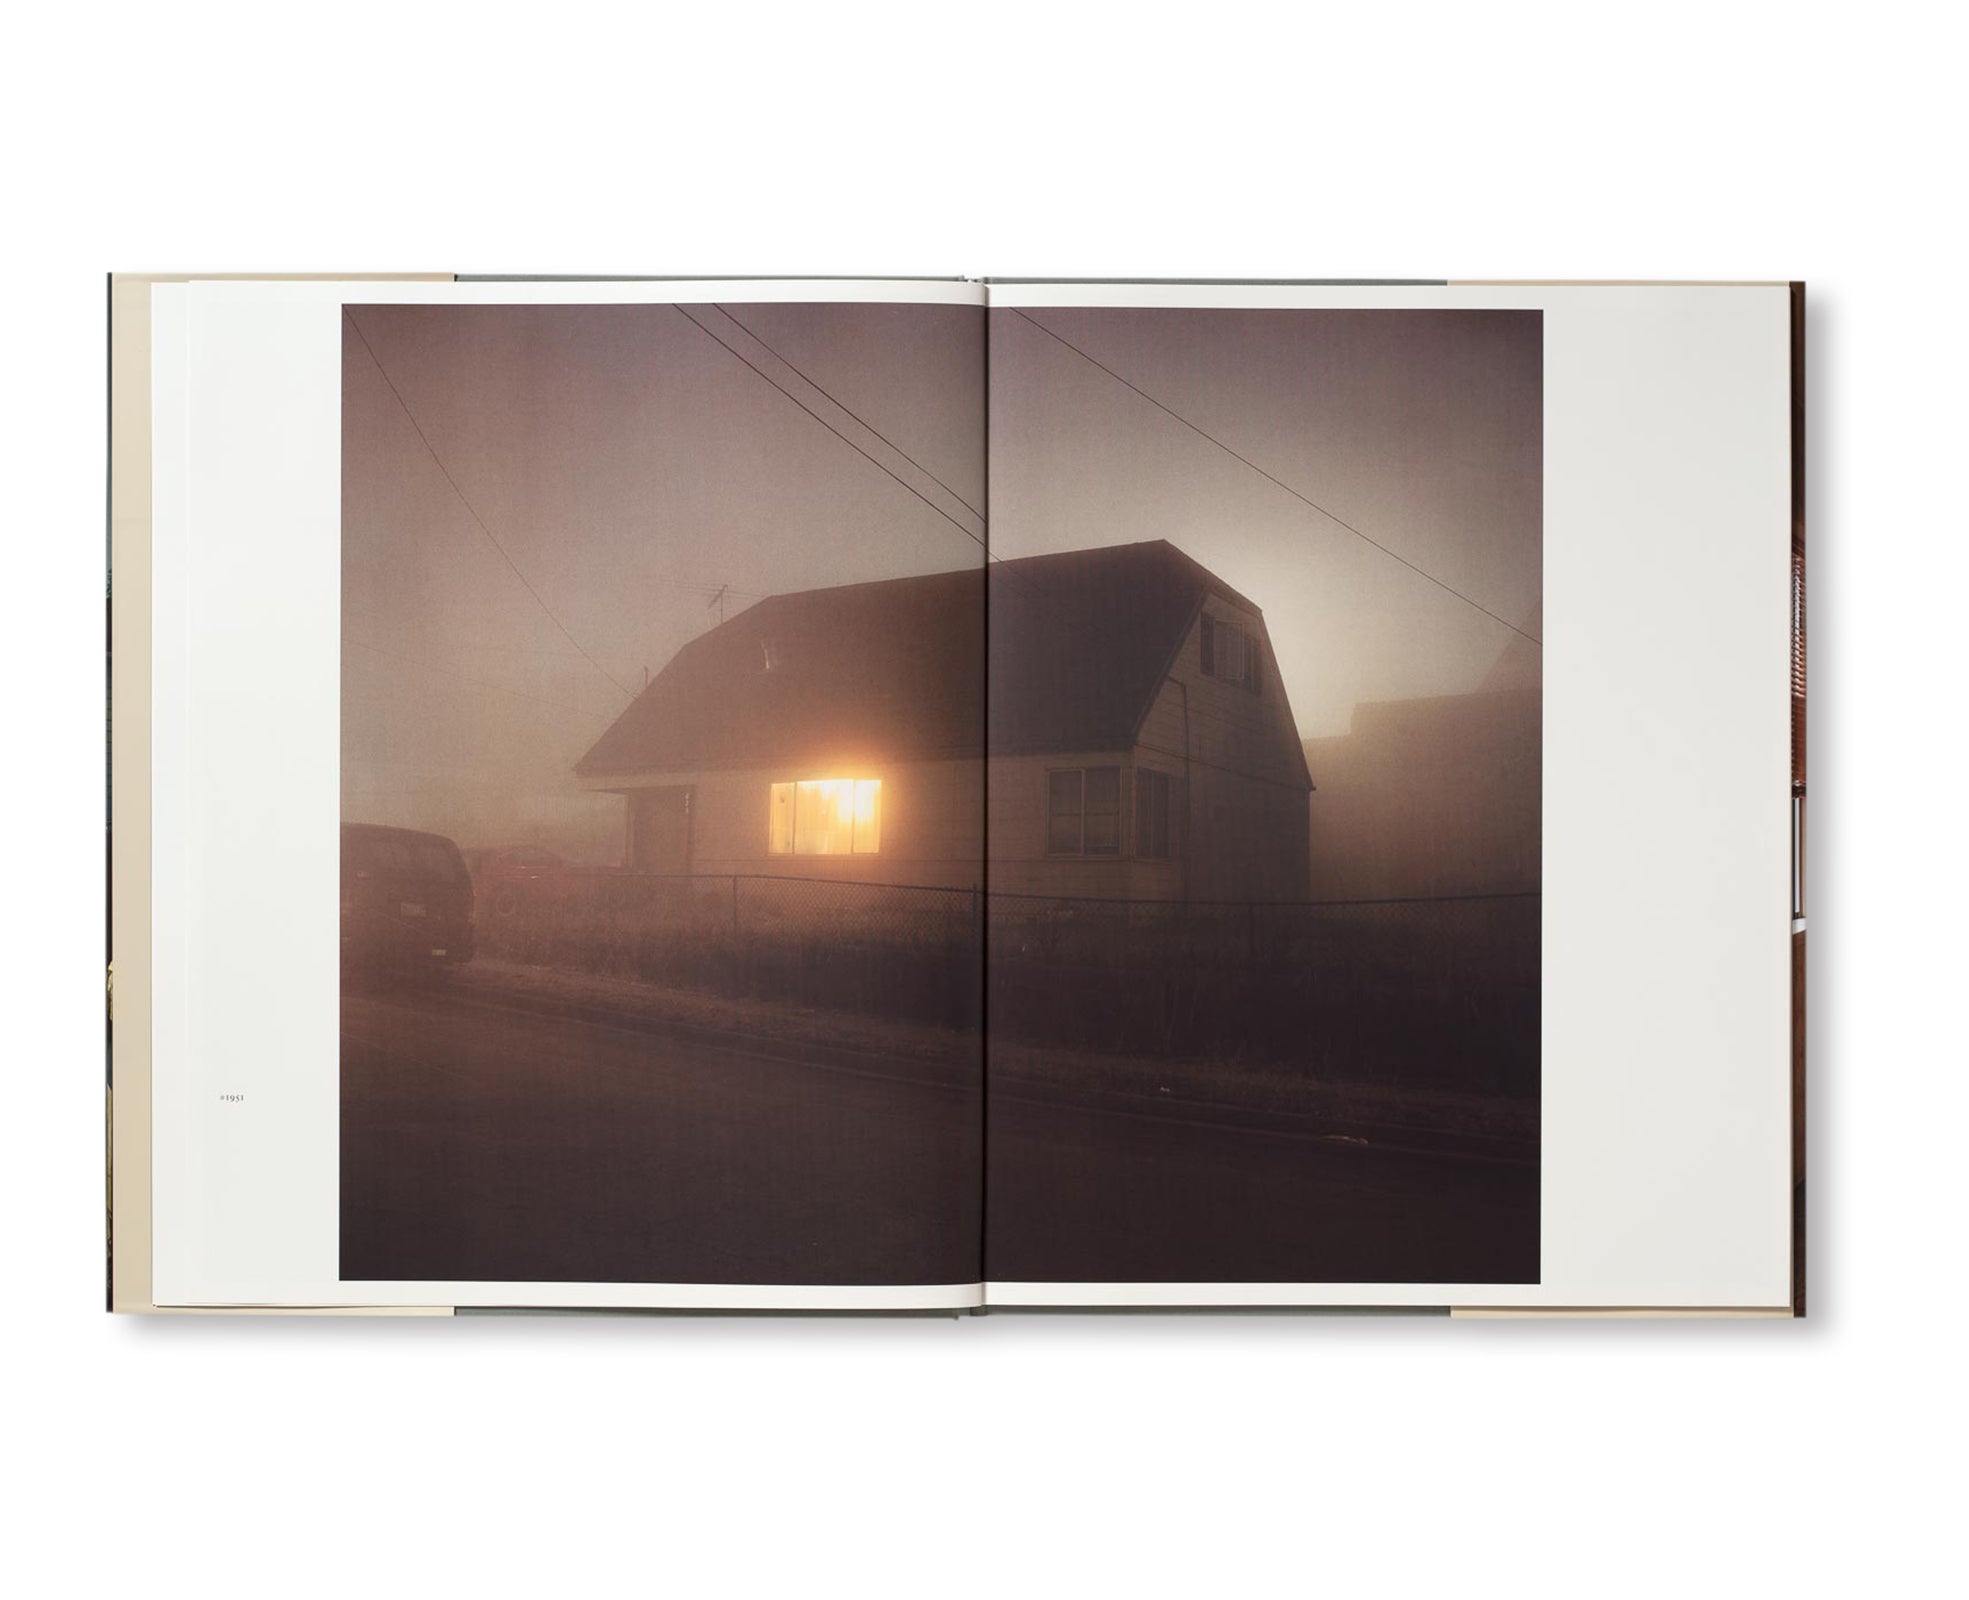 HOUSE HUNTING by Todd Hido